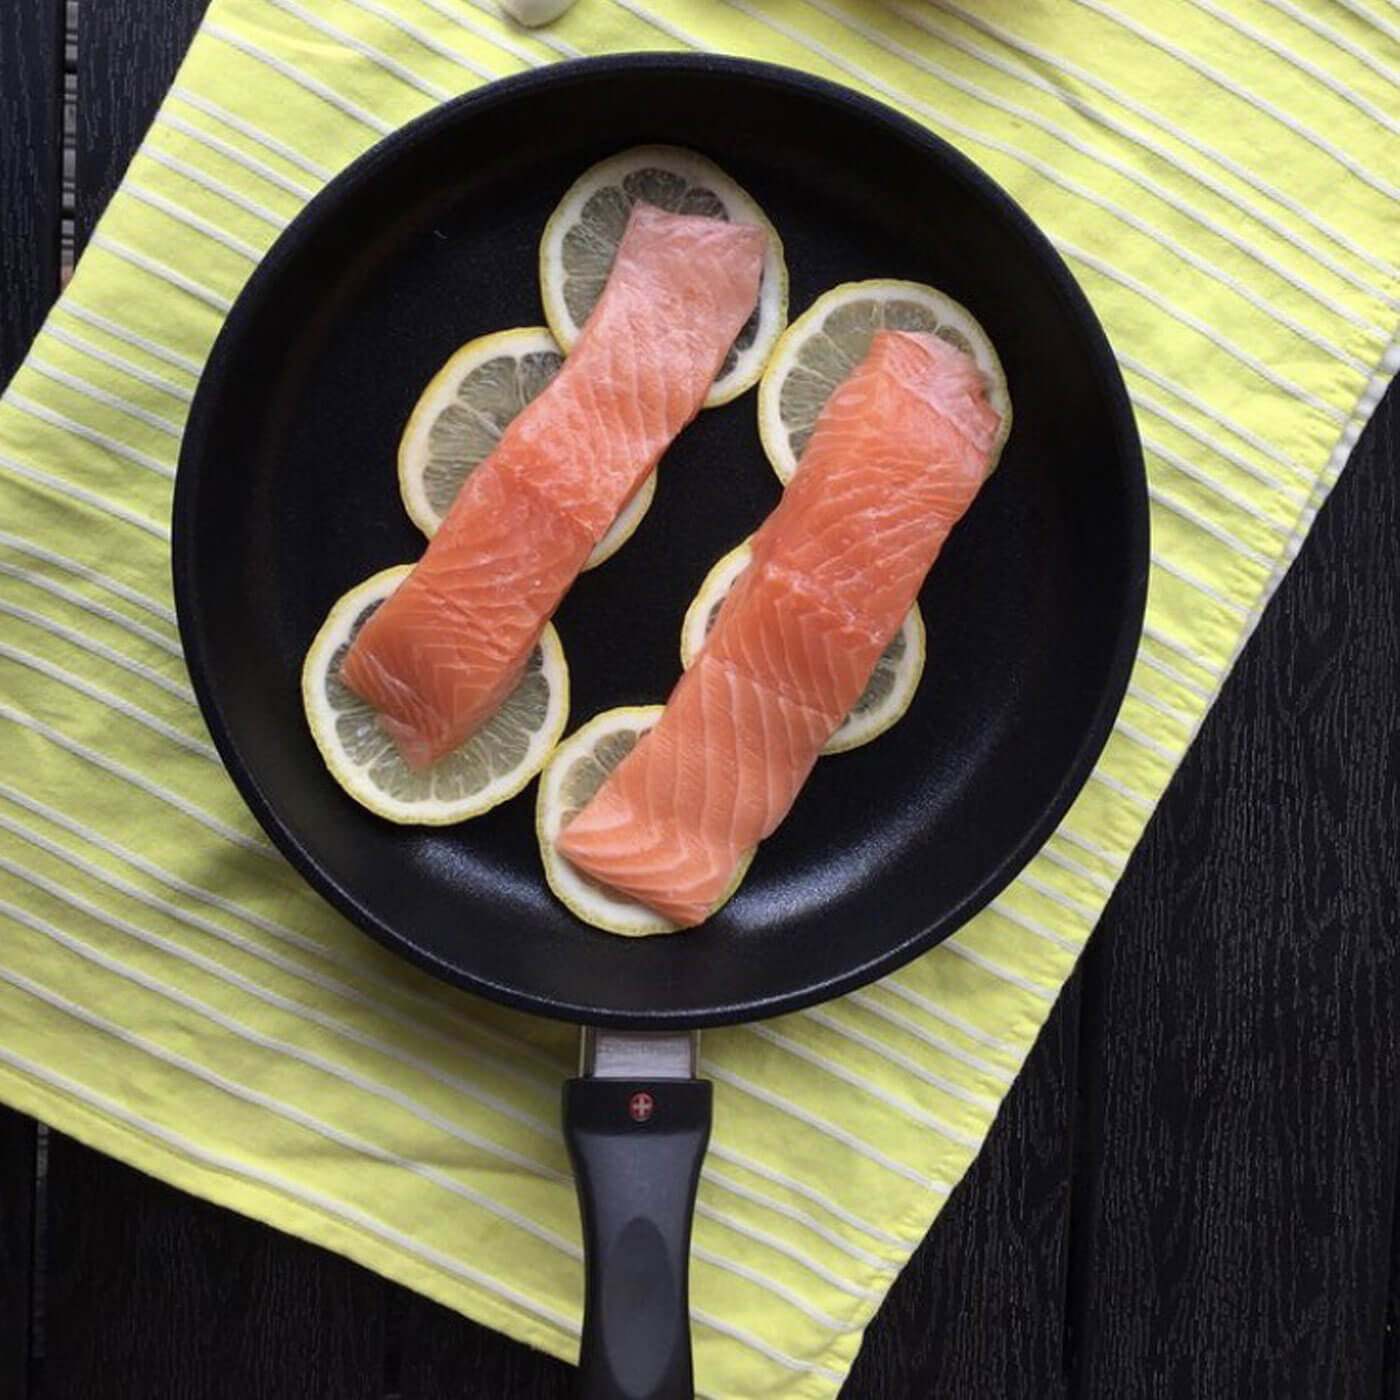 xd fry pan in use with lemon slices and salmon on wooden table